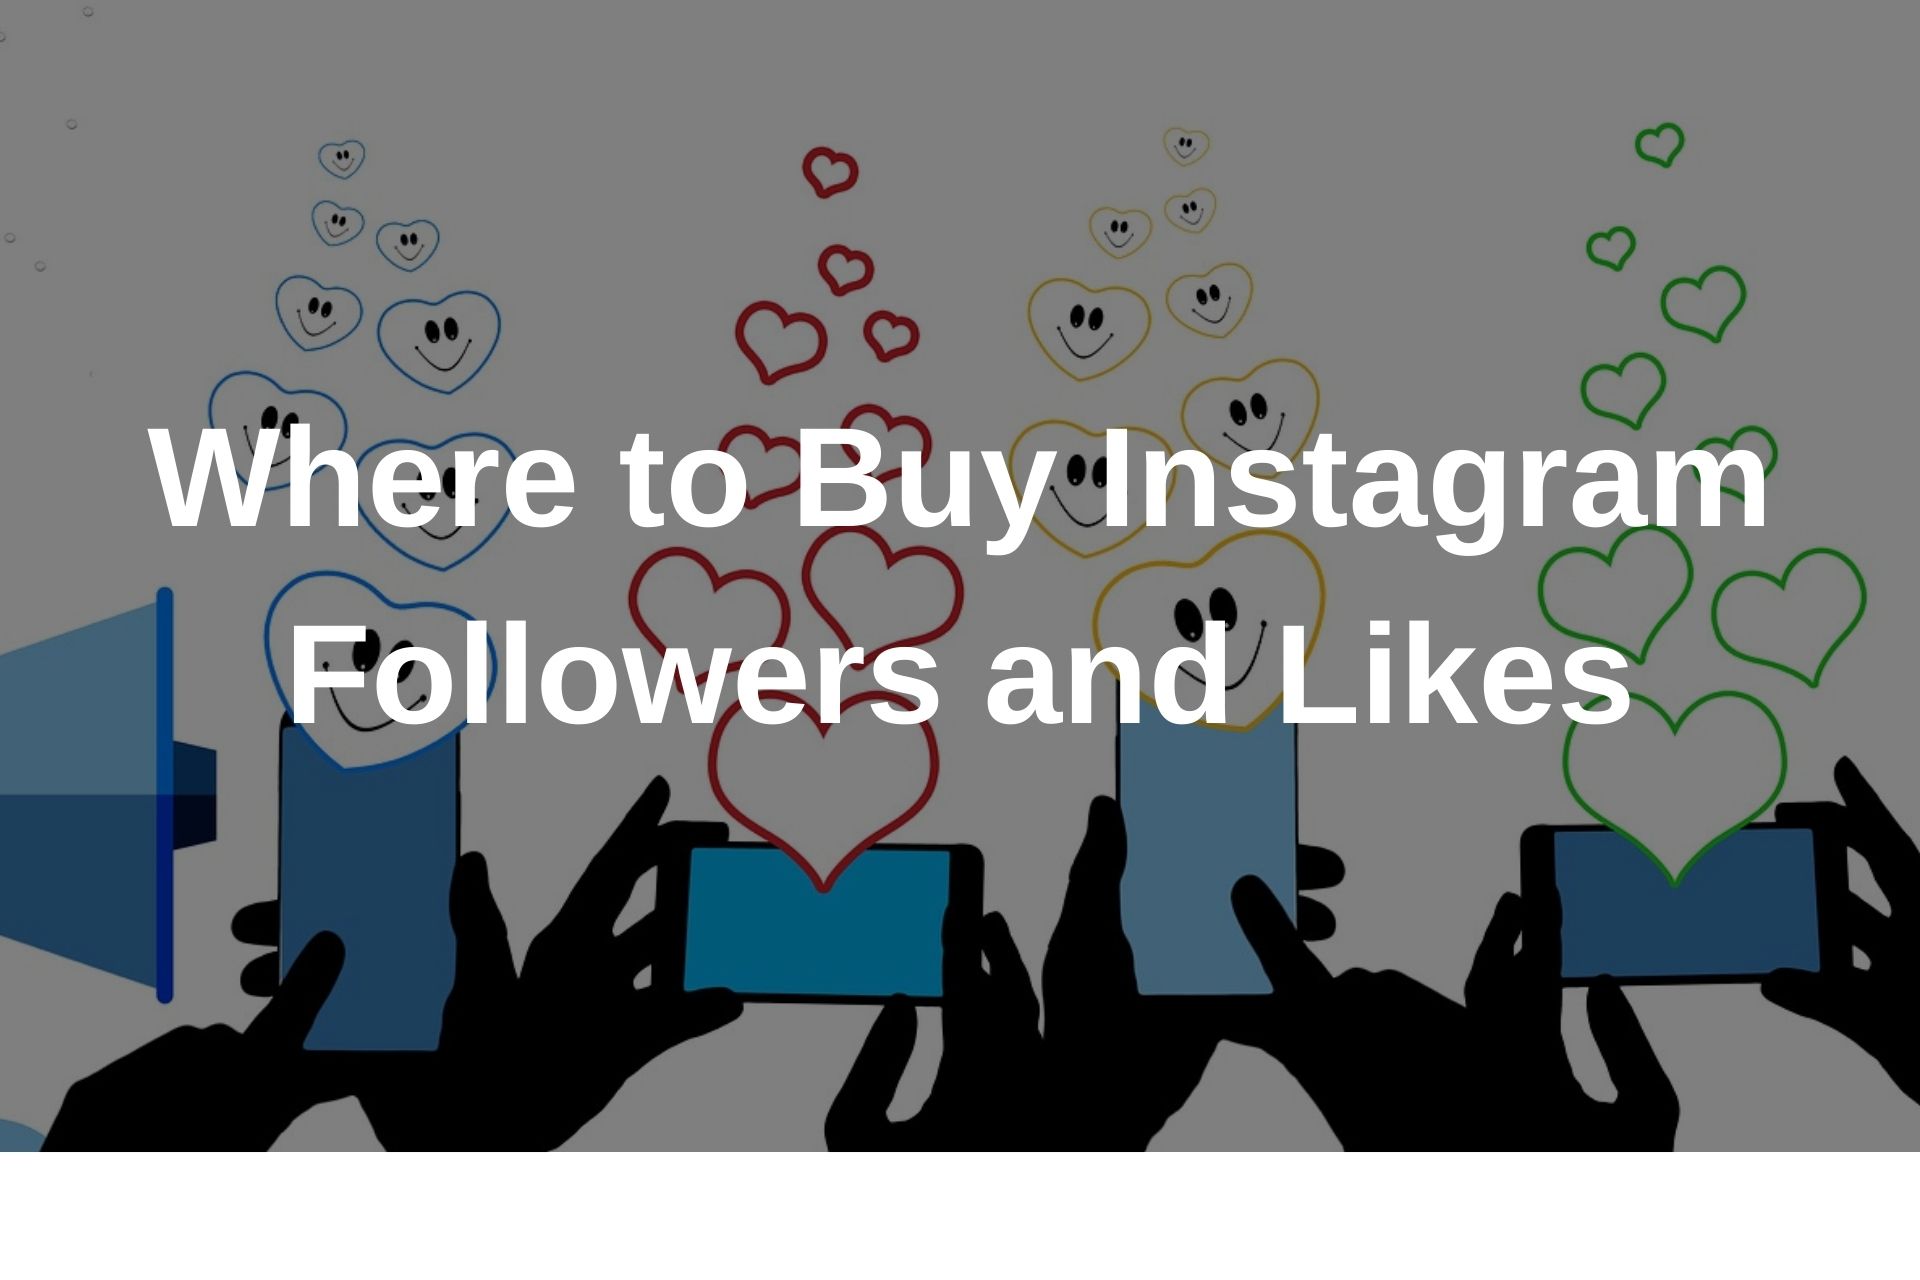 Where to Buy Instagram Followers and Likes